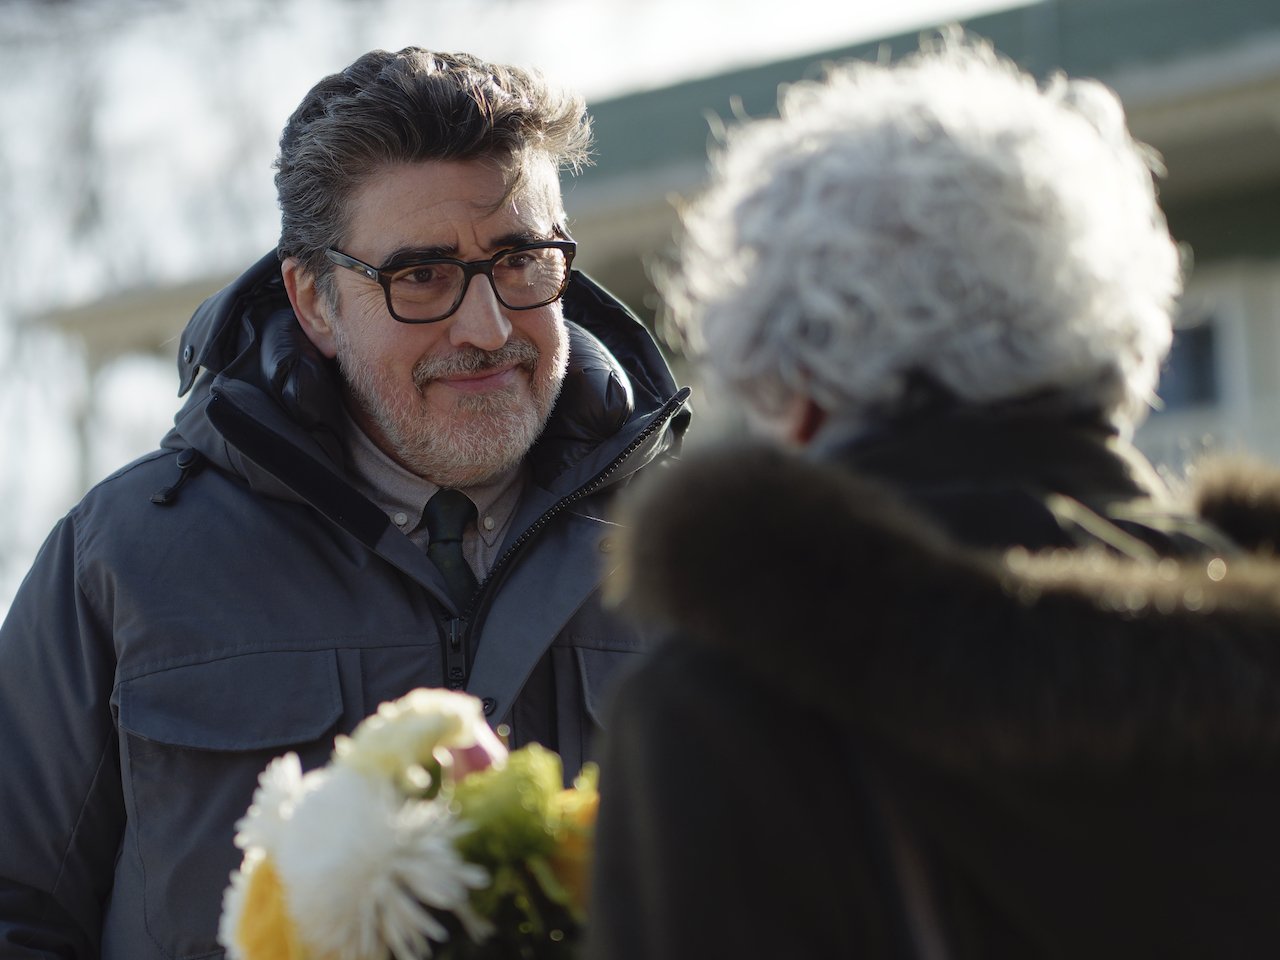 A photo of a man with glasses speaking to a woman with white hair. Both are wearing winder coats and the woman is carrying flowers.